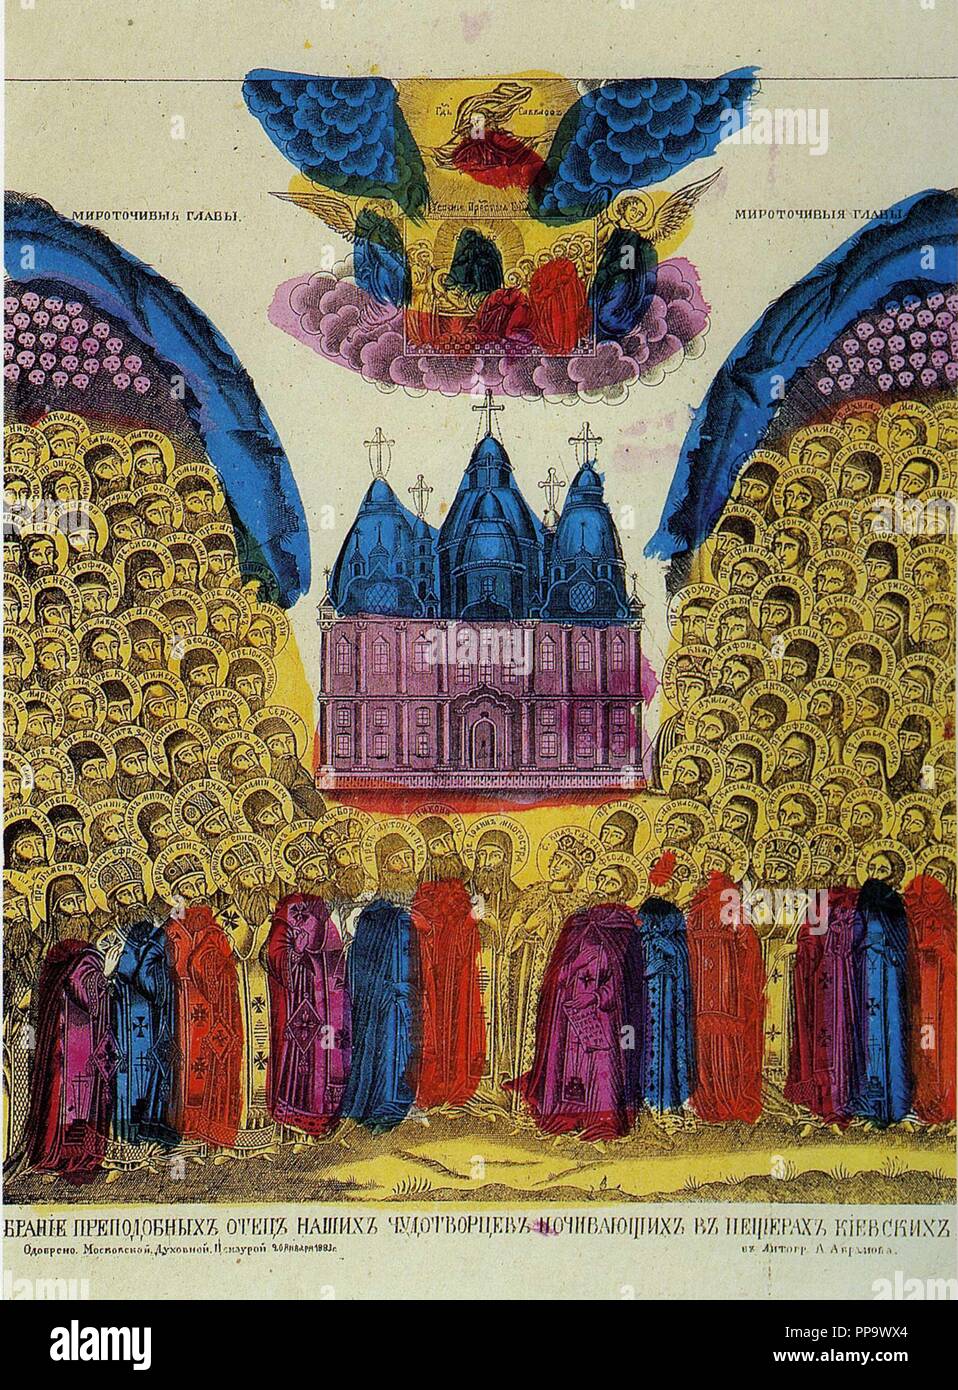 The Synaxis of the Saints of the Kiev Caves (Lubok). Museum: Russian Museum of Ethnography. Author: ANONYMOUS. Stock Photo